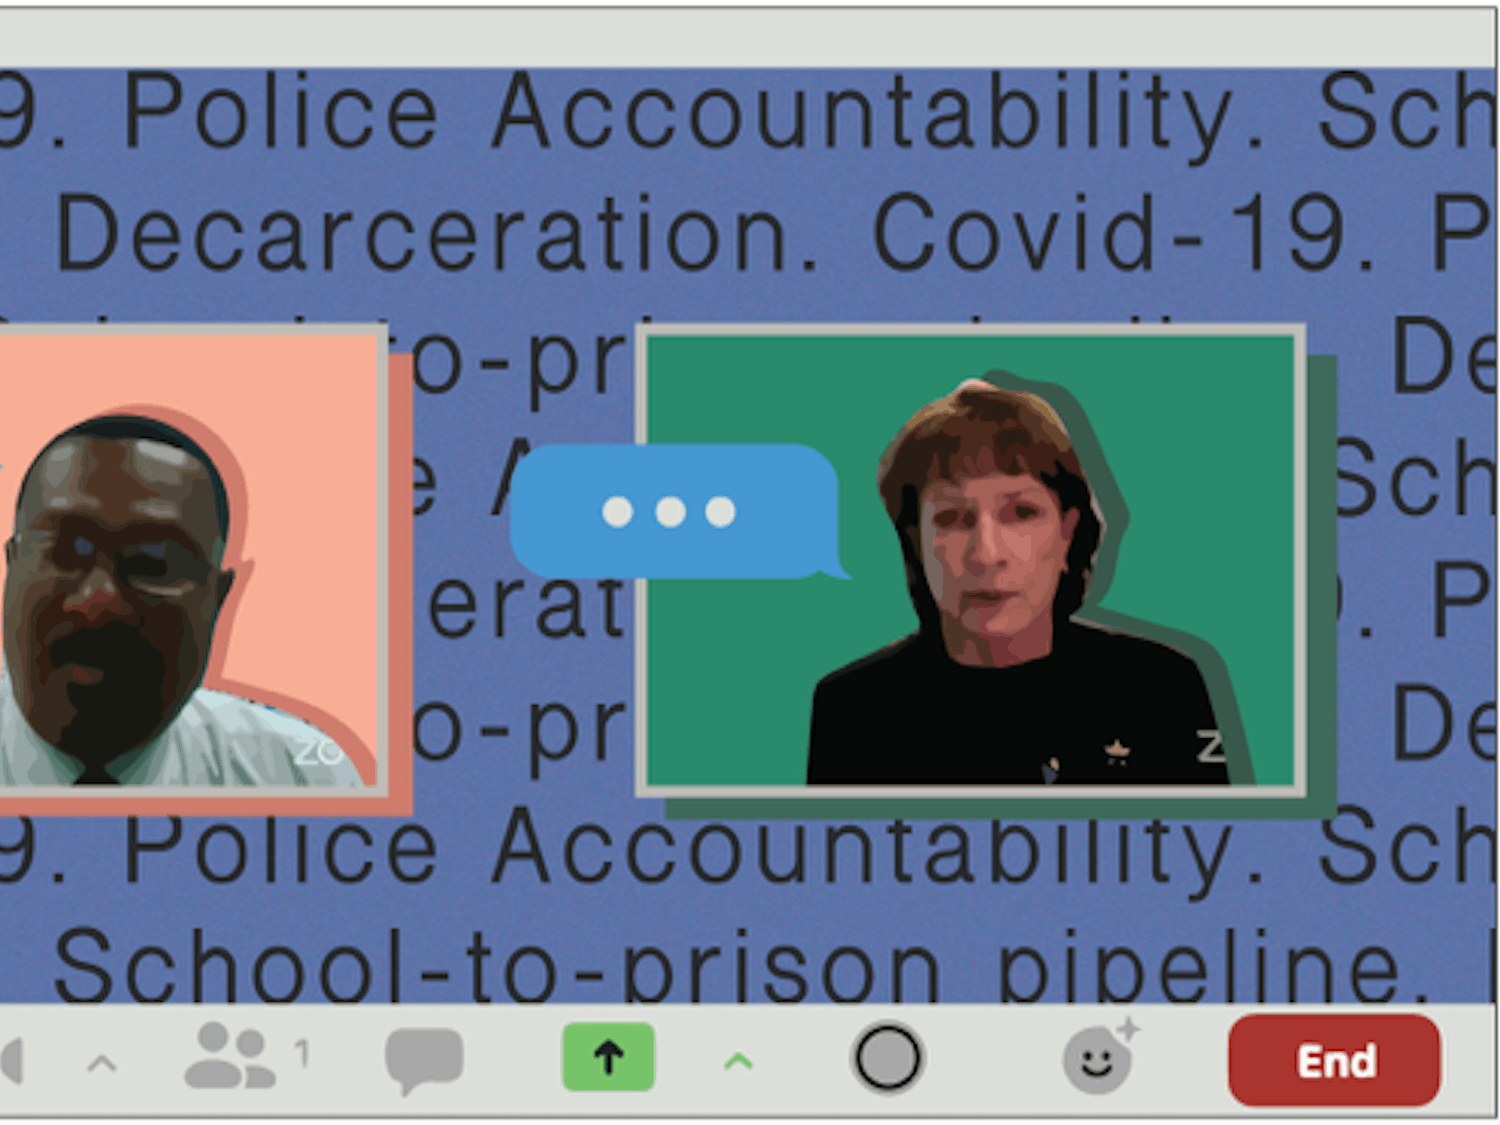 Incumbent Sheriff Sadie Darnell and Clovis Watson discussed the response to COVID-19, police accountability, the school-to-prison pipeline and decarceration.